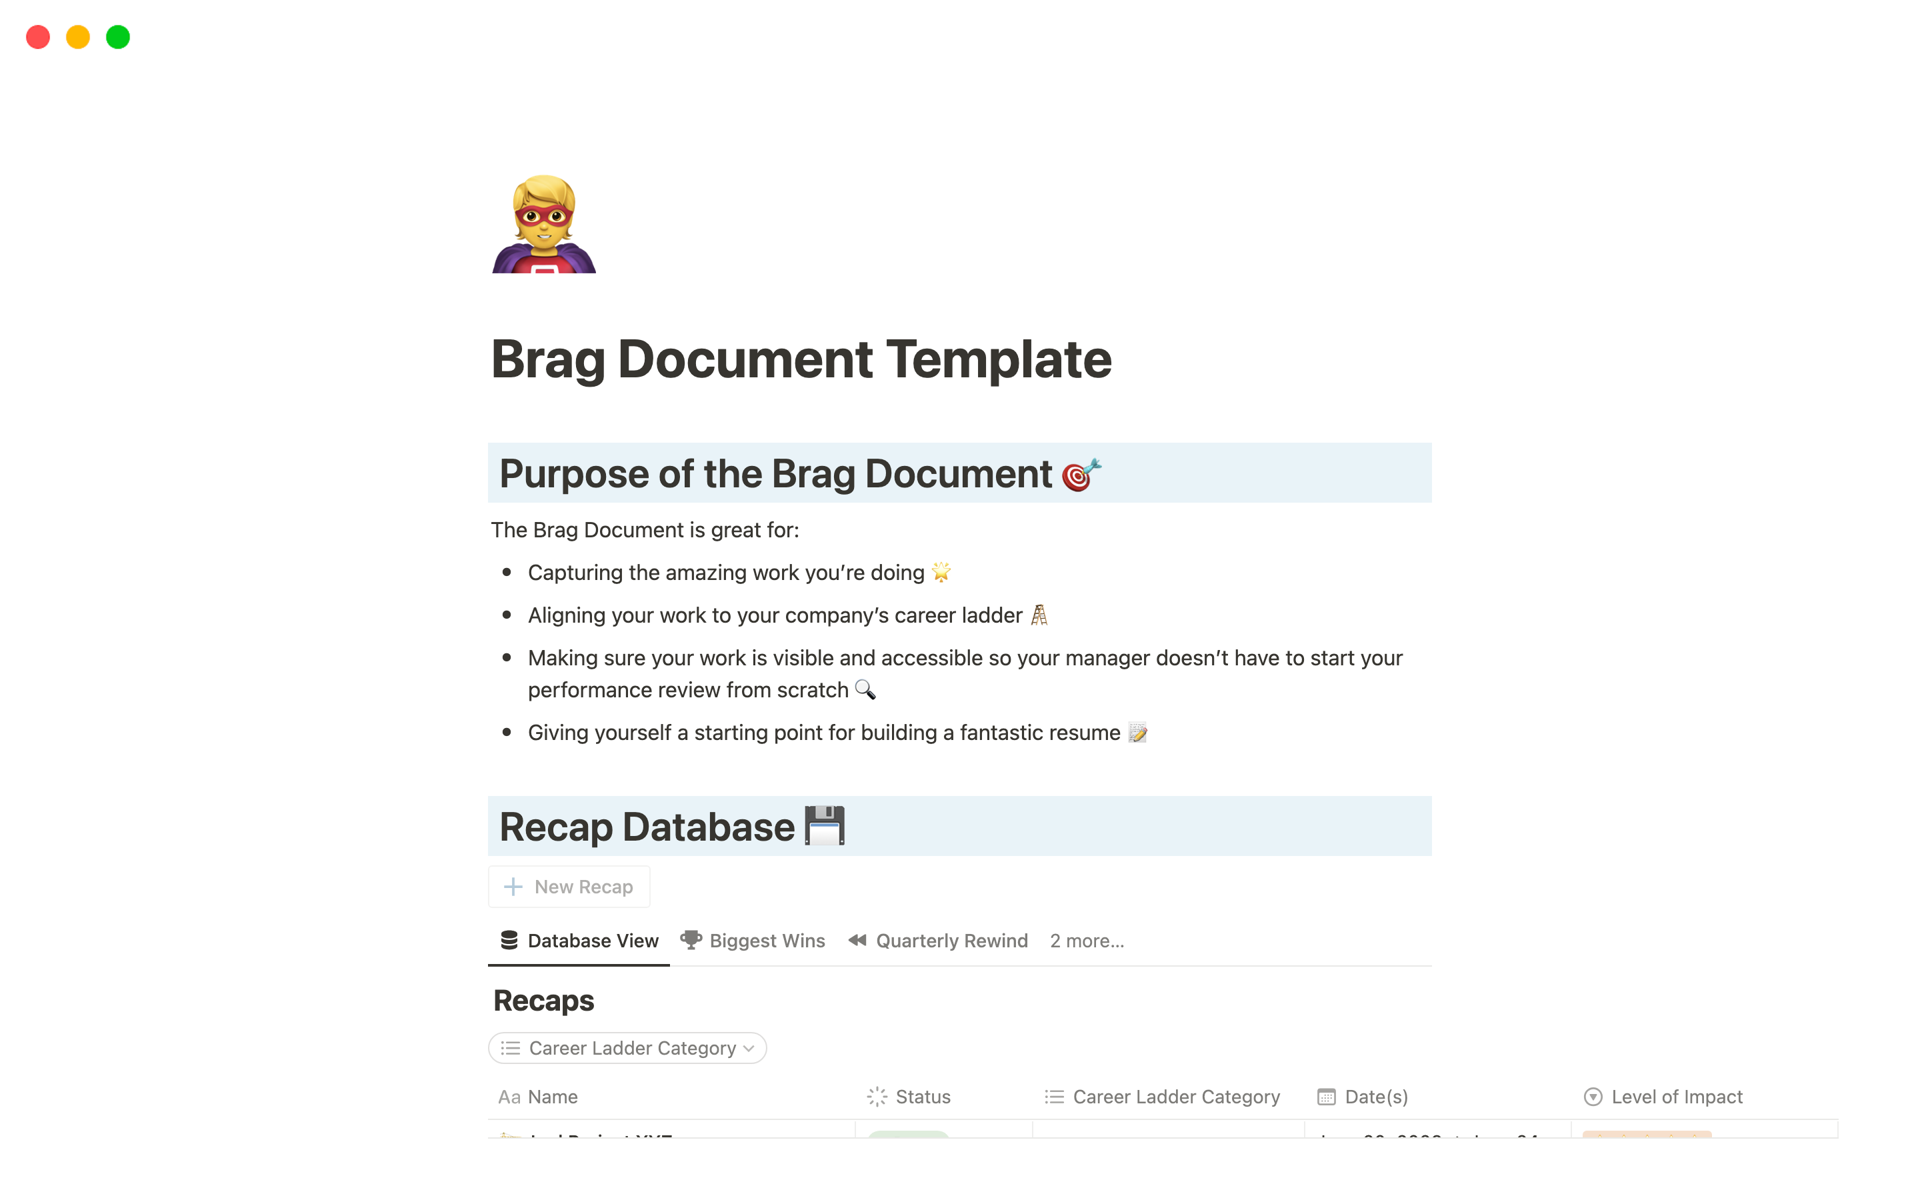 Capture the amazing work you're doing in a brag document 🤩